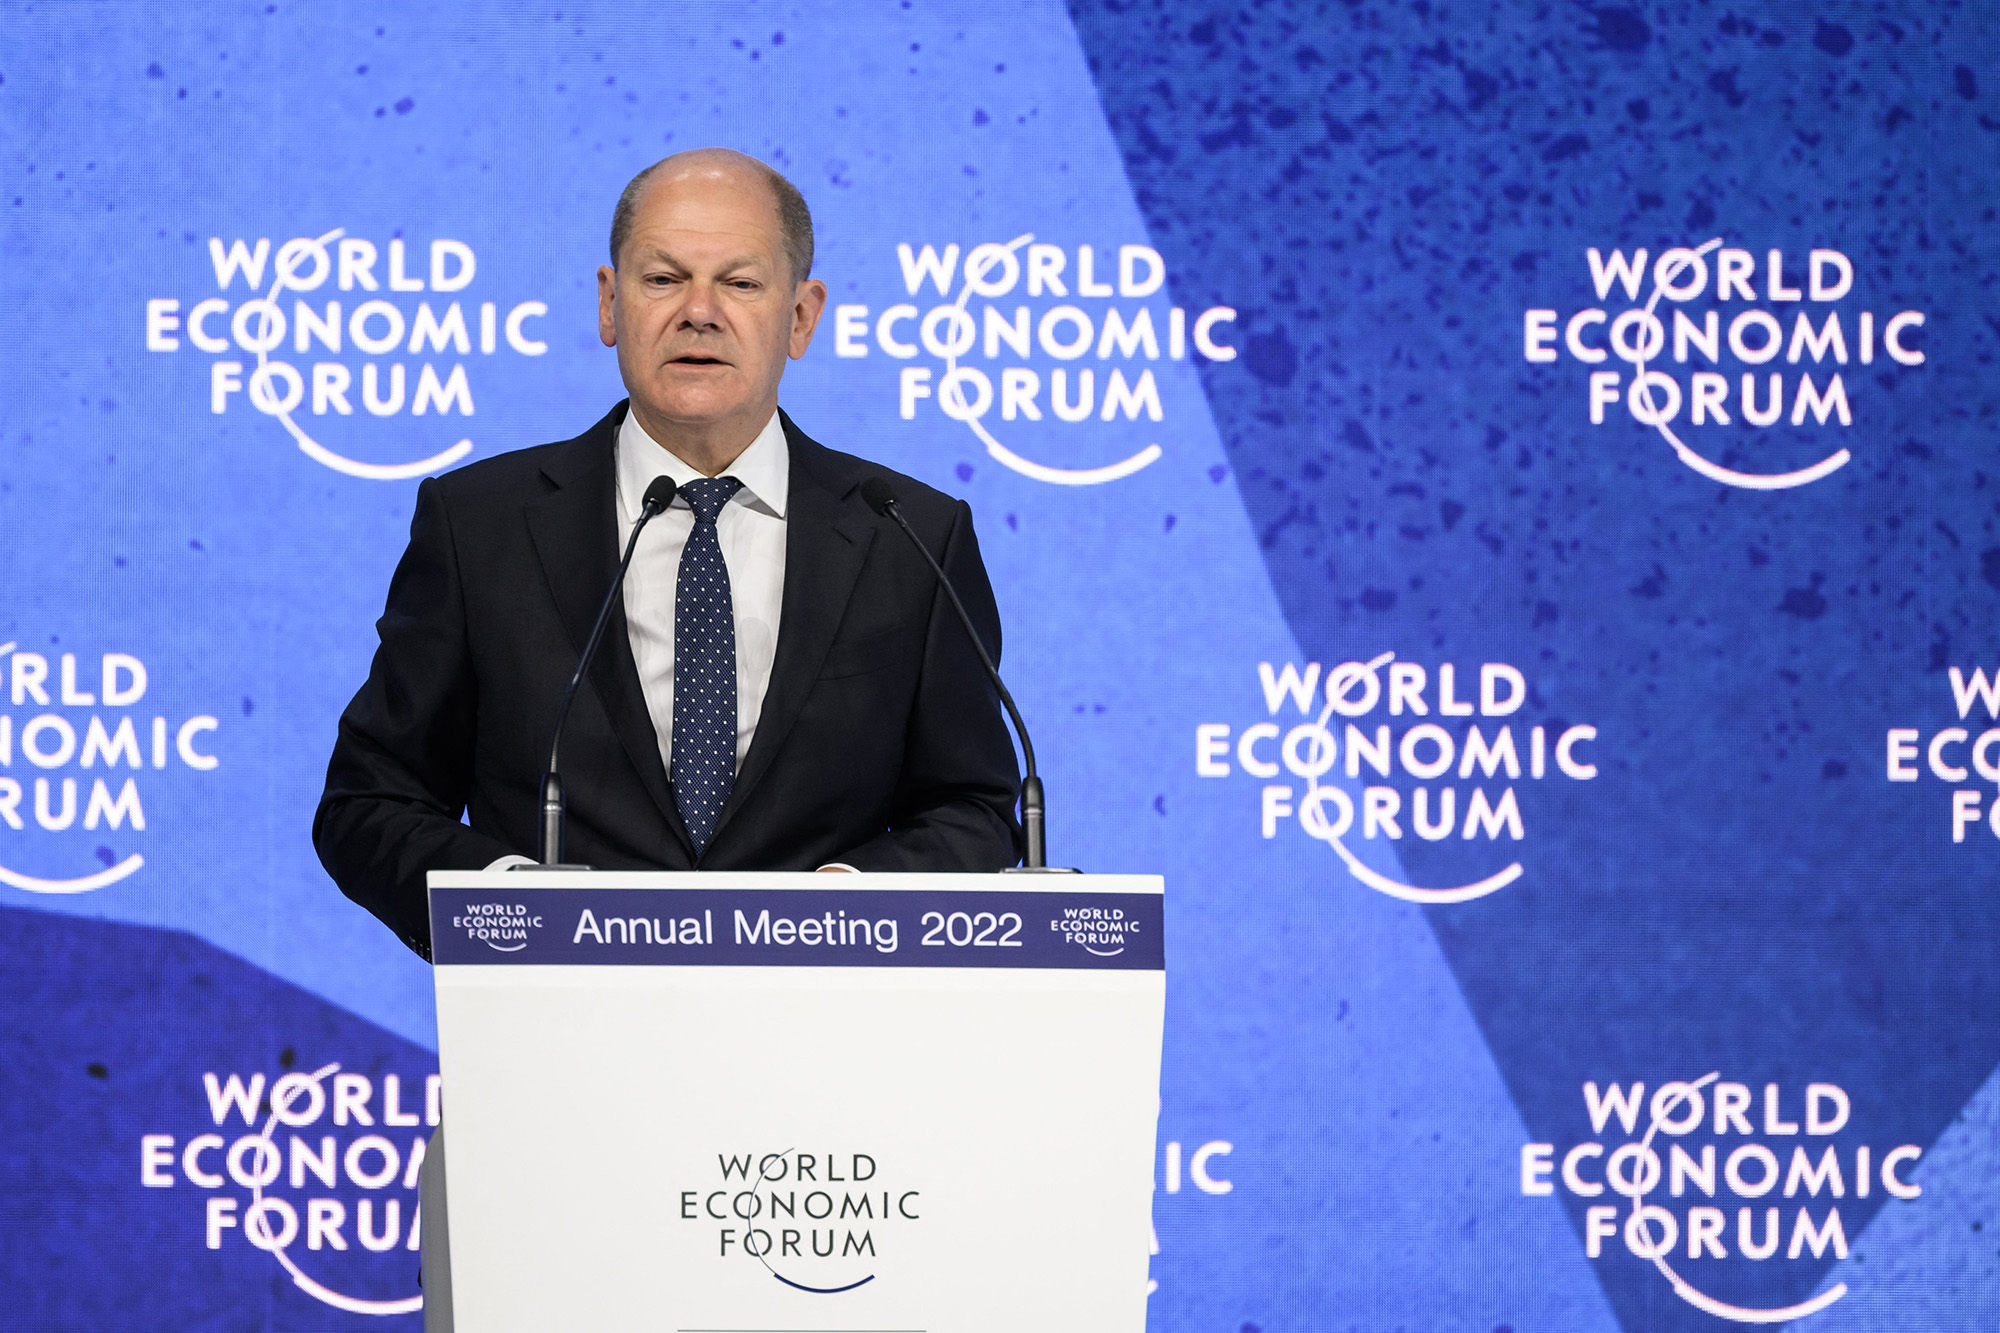 German Chancellor Olaf Scholz addresses the assembly during the World Economic Forum (WEF) annual meeting in Davos, Swon May 26.